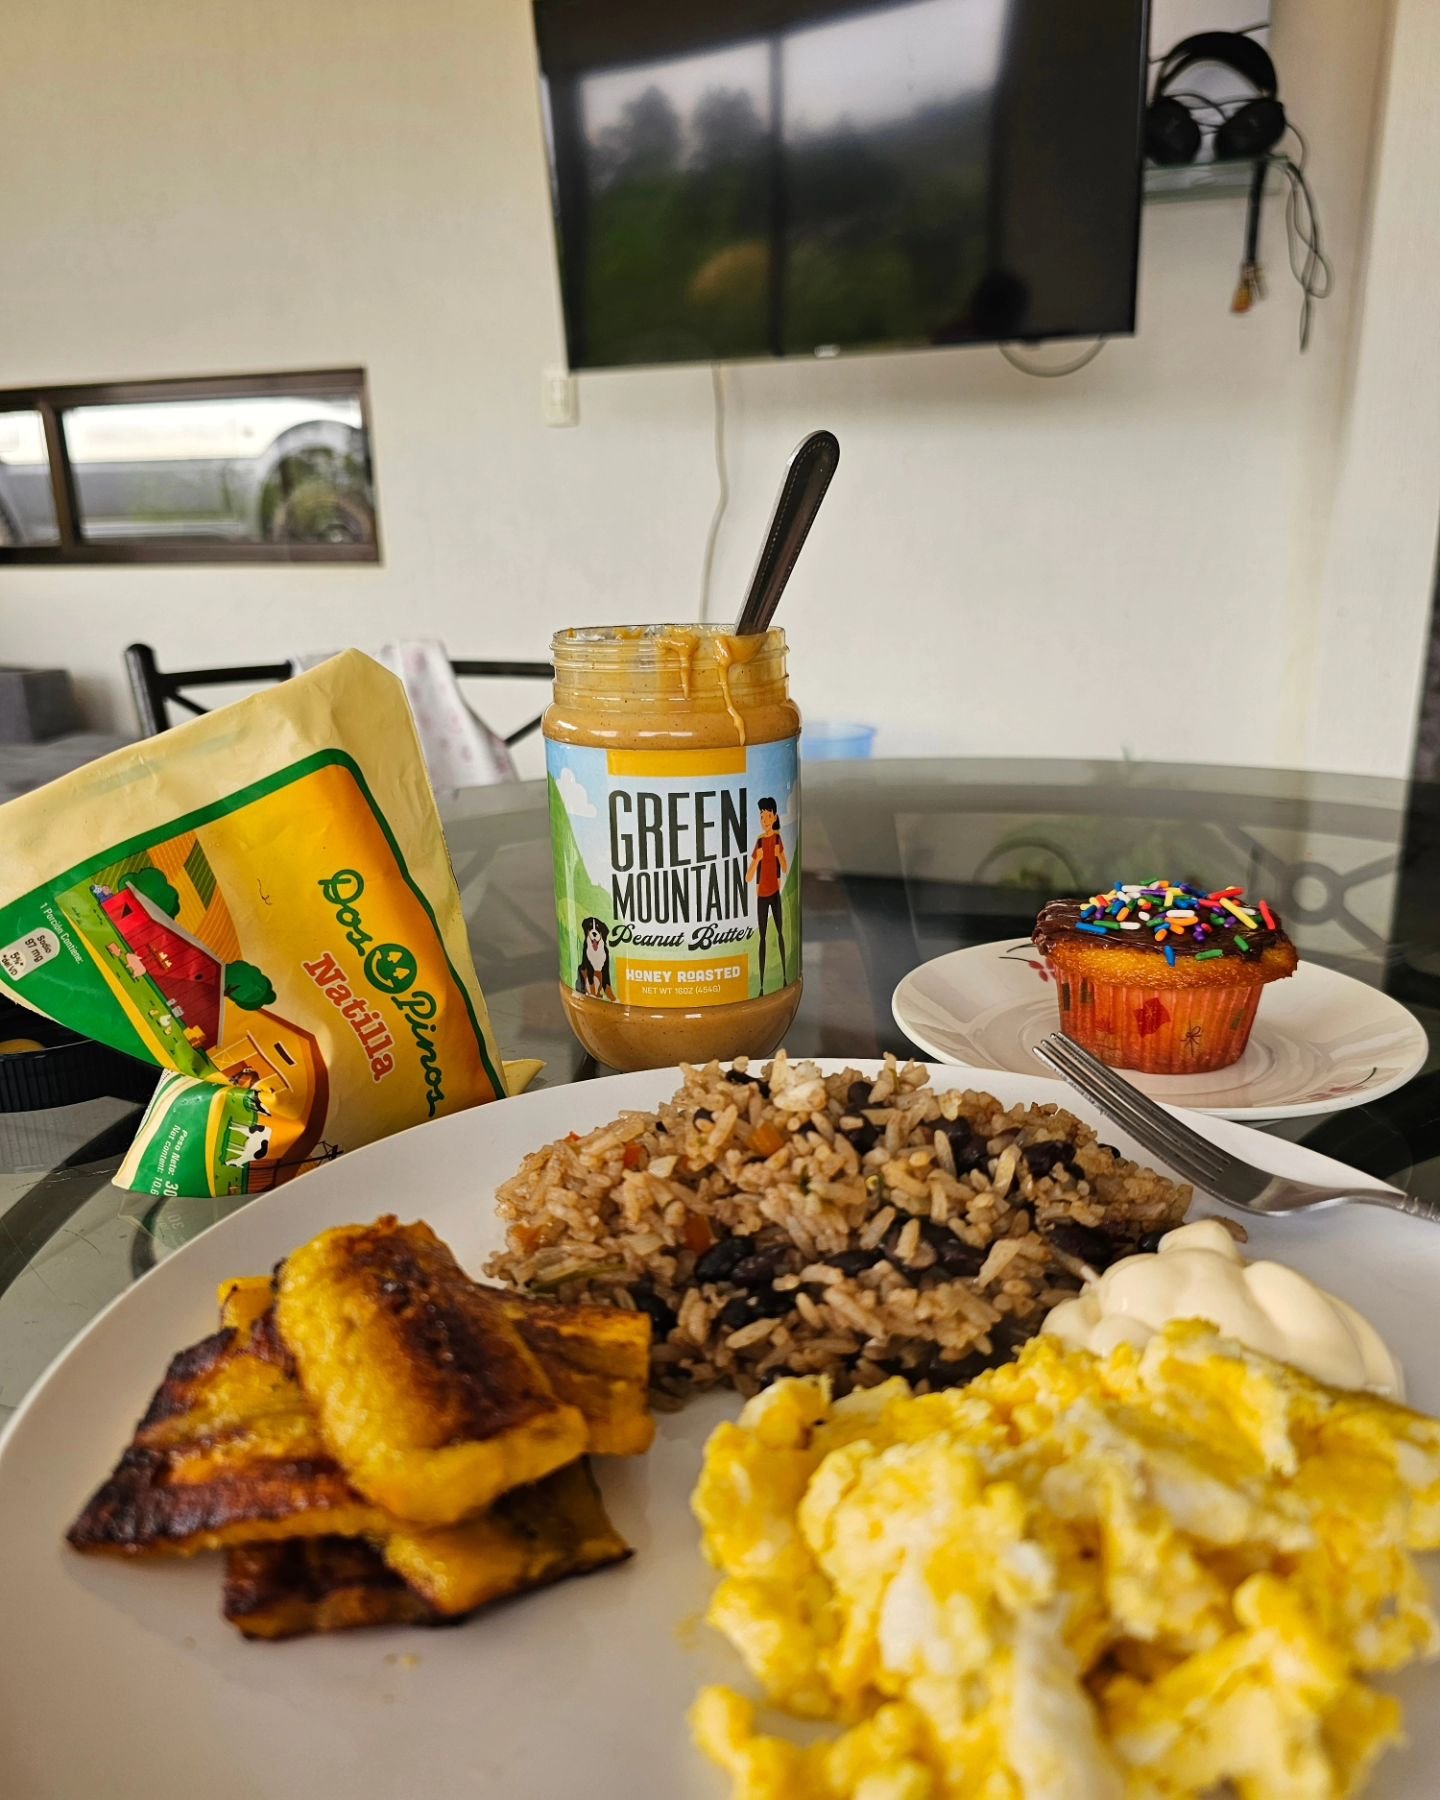 This is how spring break looks like at Green Mountain Peanut Butter 🥜 ❤️ 🇨🇷 Family time 💕 We will be back this week with more peanut butter and new flavors! Stay tuned! Happy Spring! ✨️🌼🌺